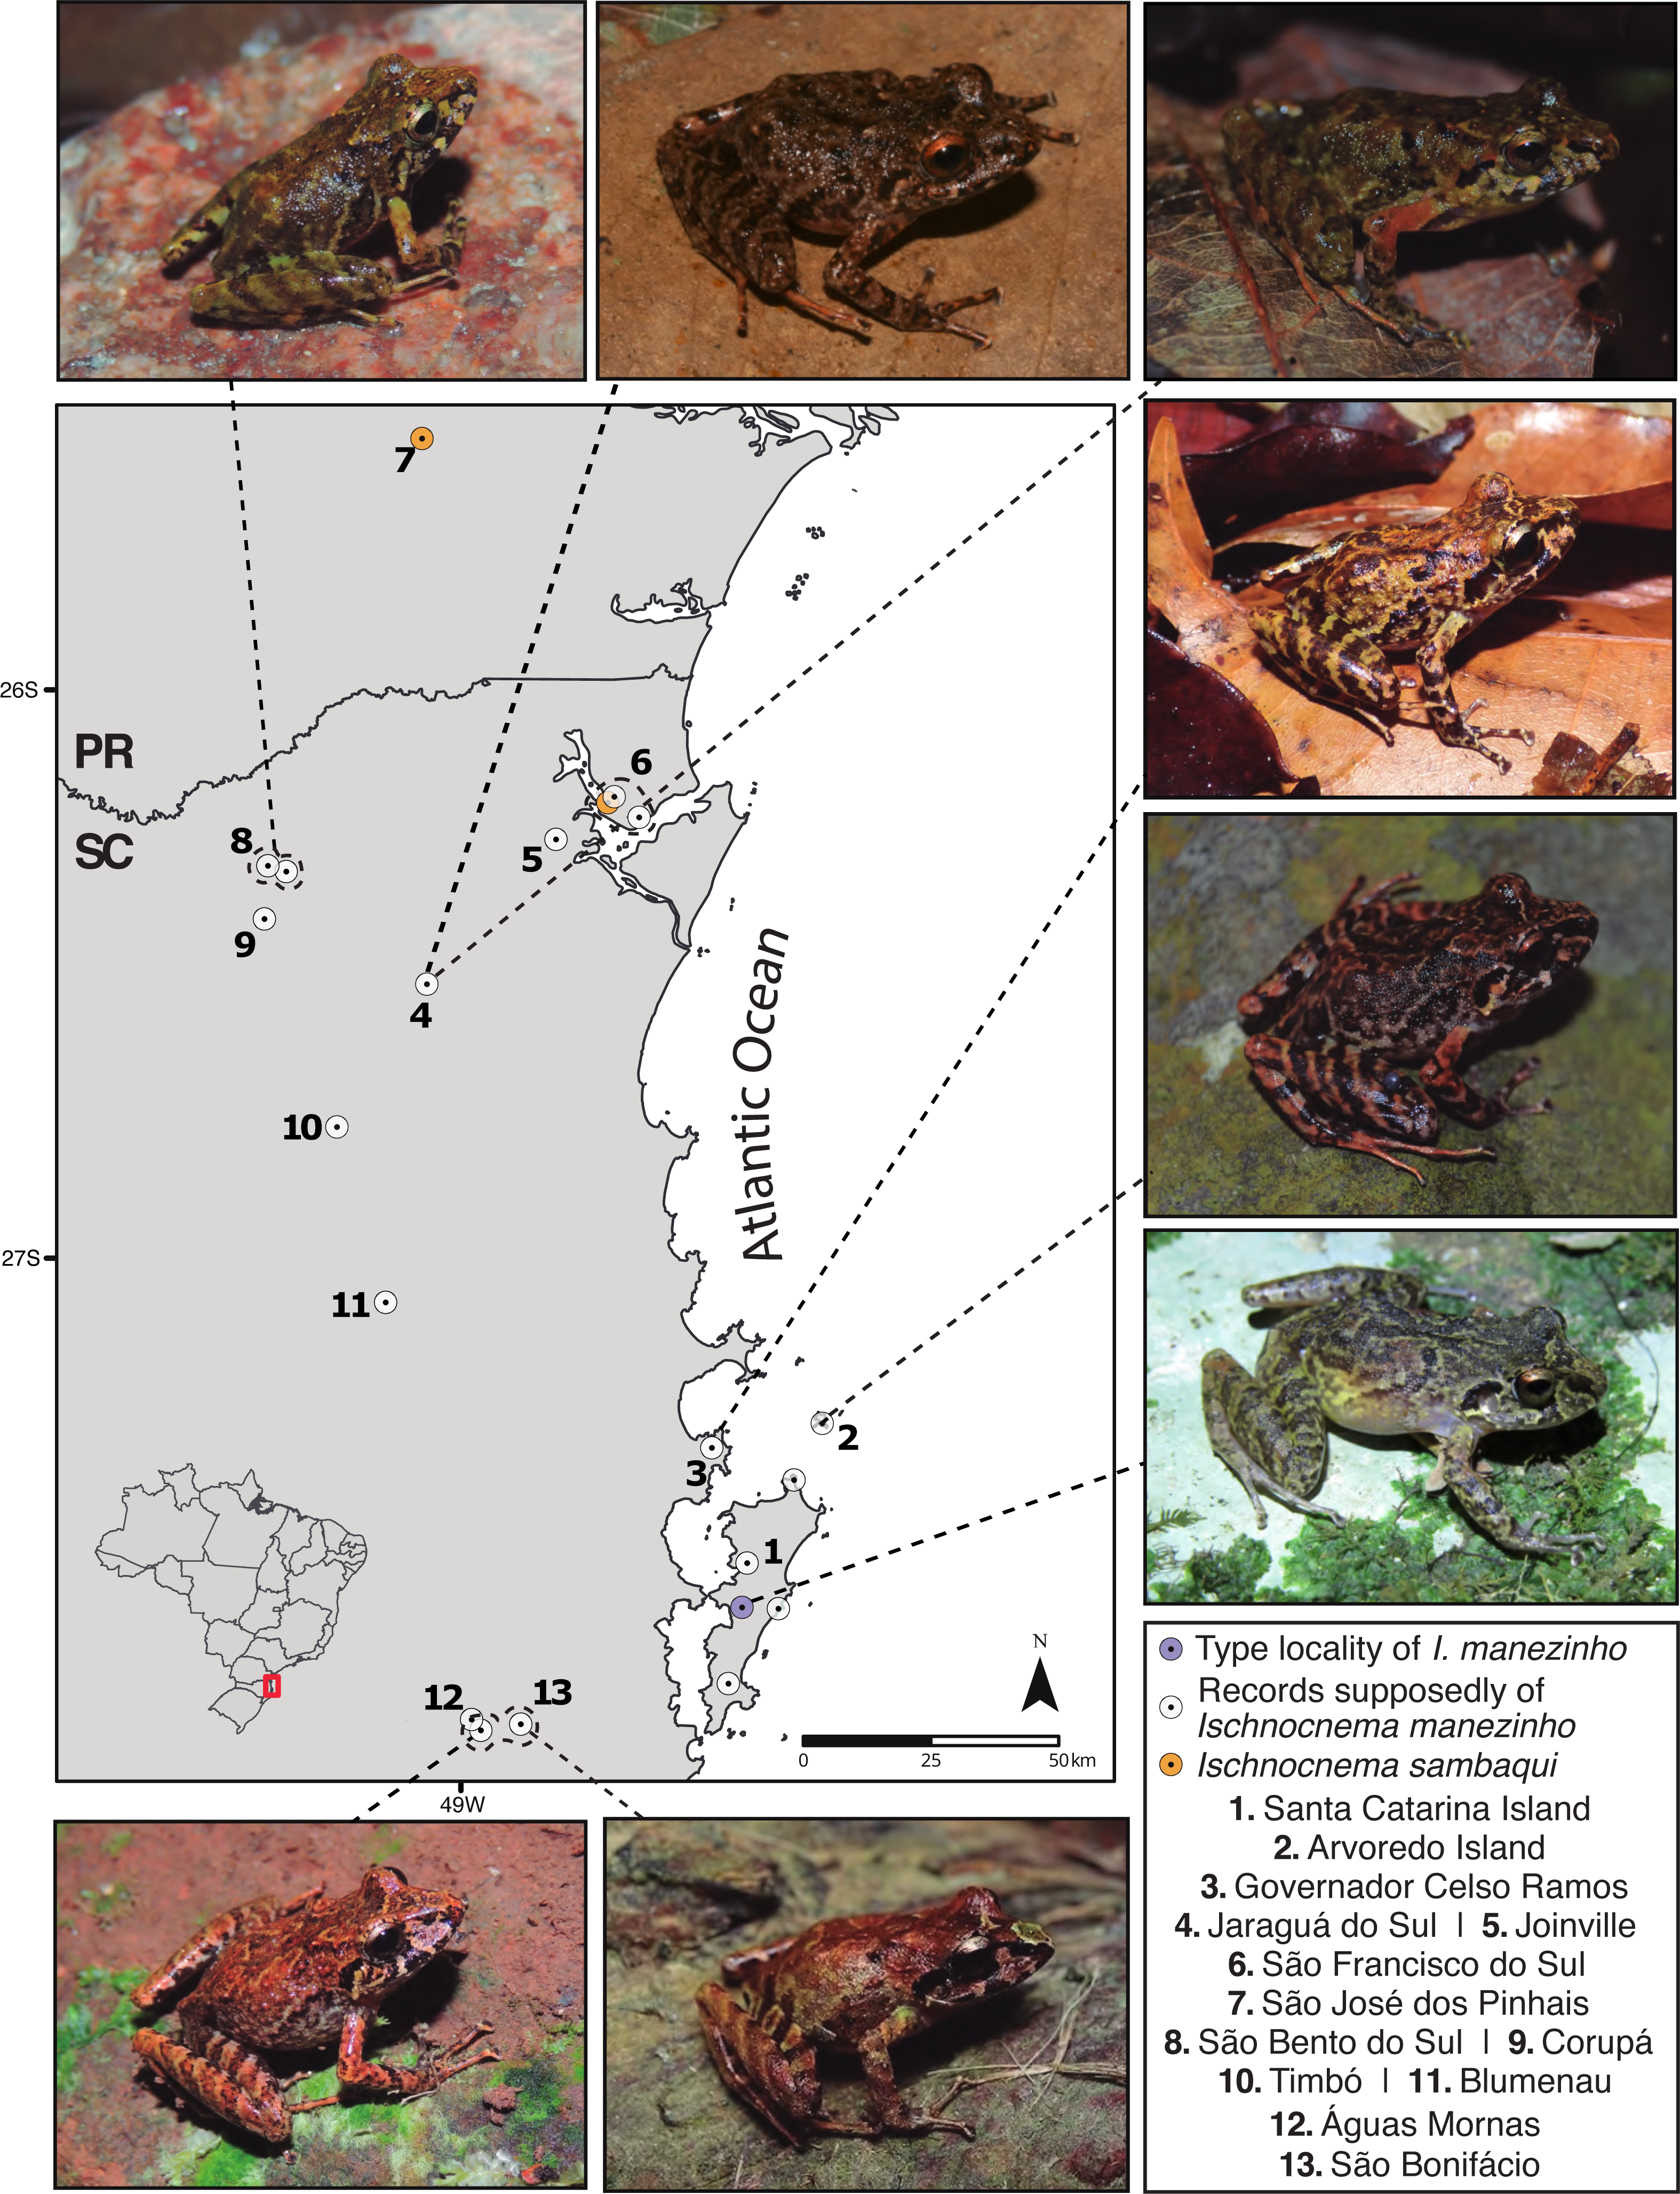 Discovering the diversity of tadpoles in the mid-north Brazil